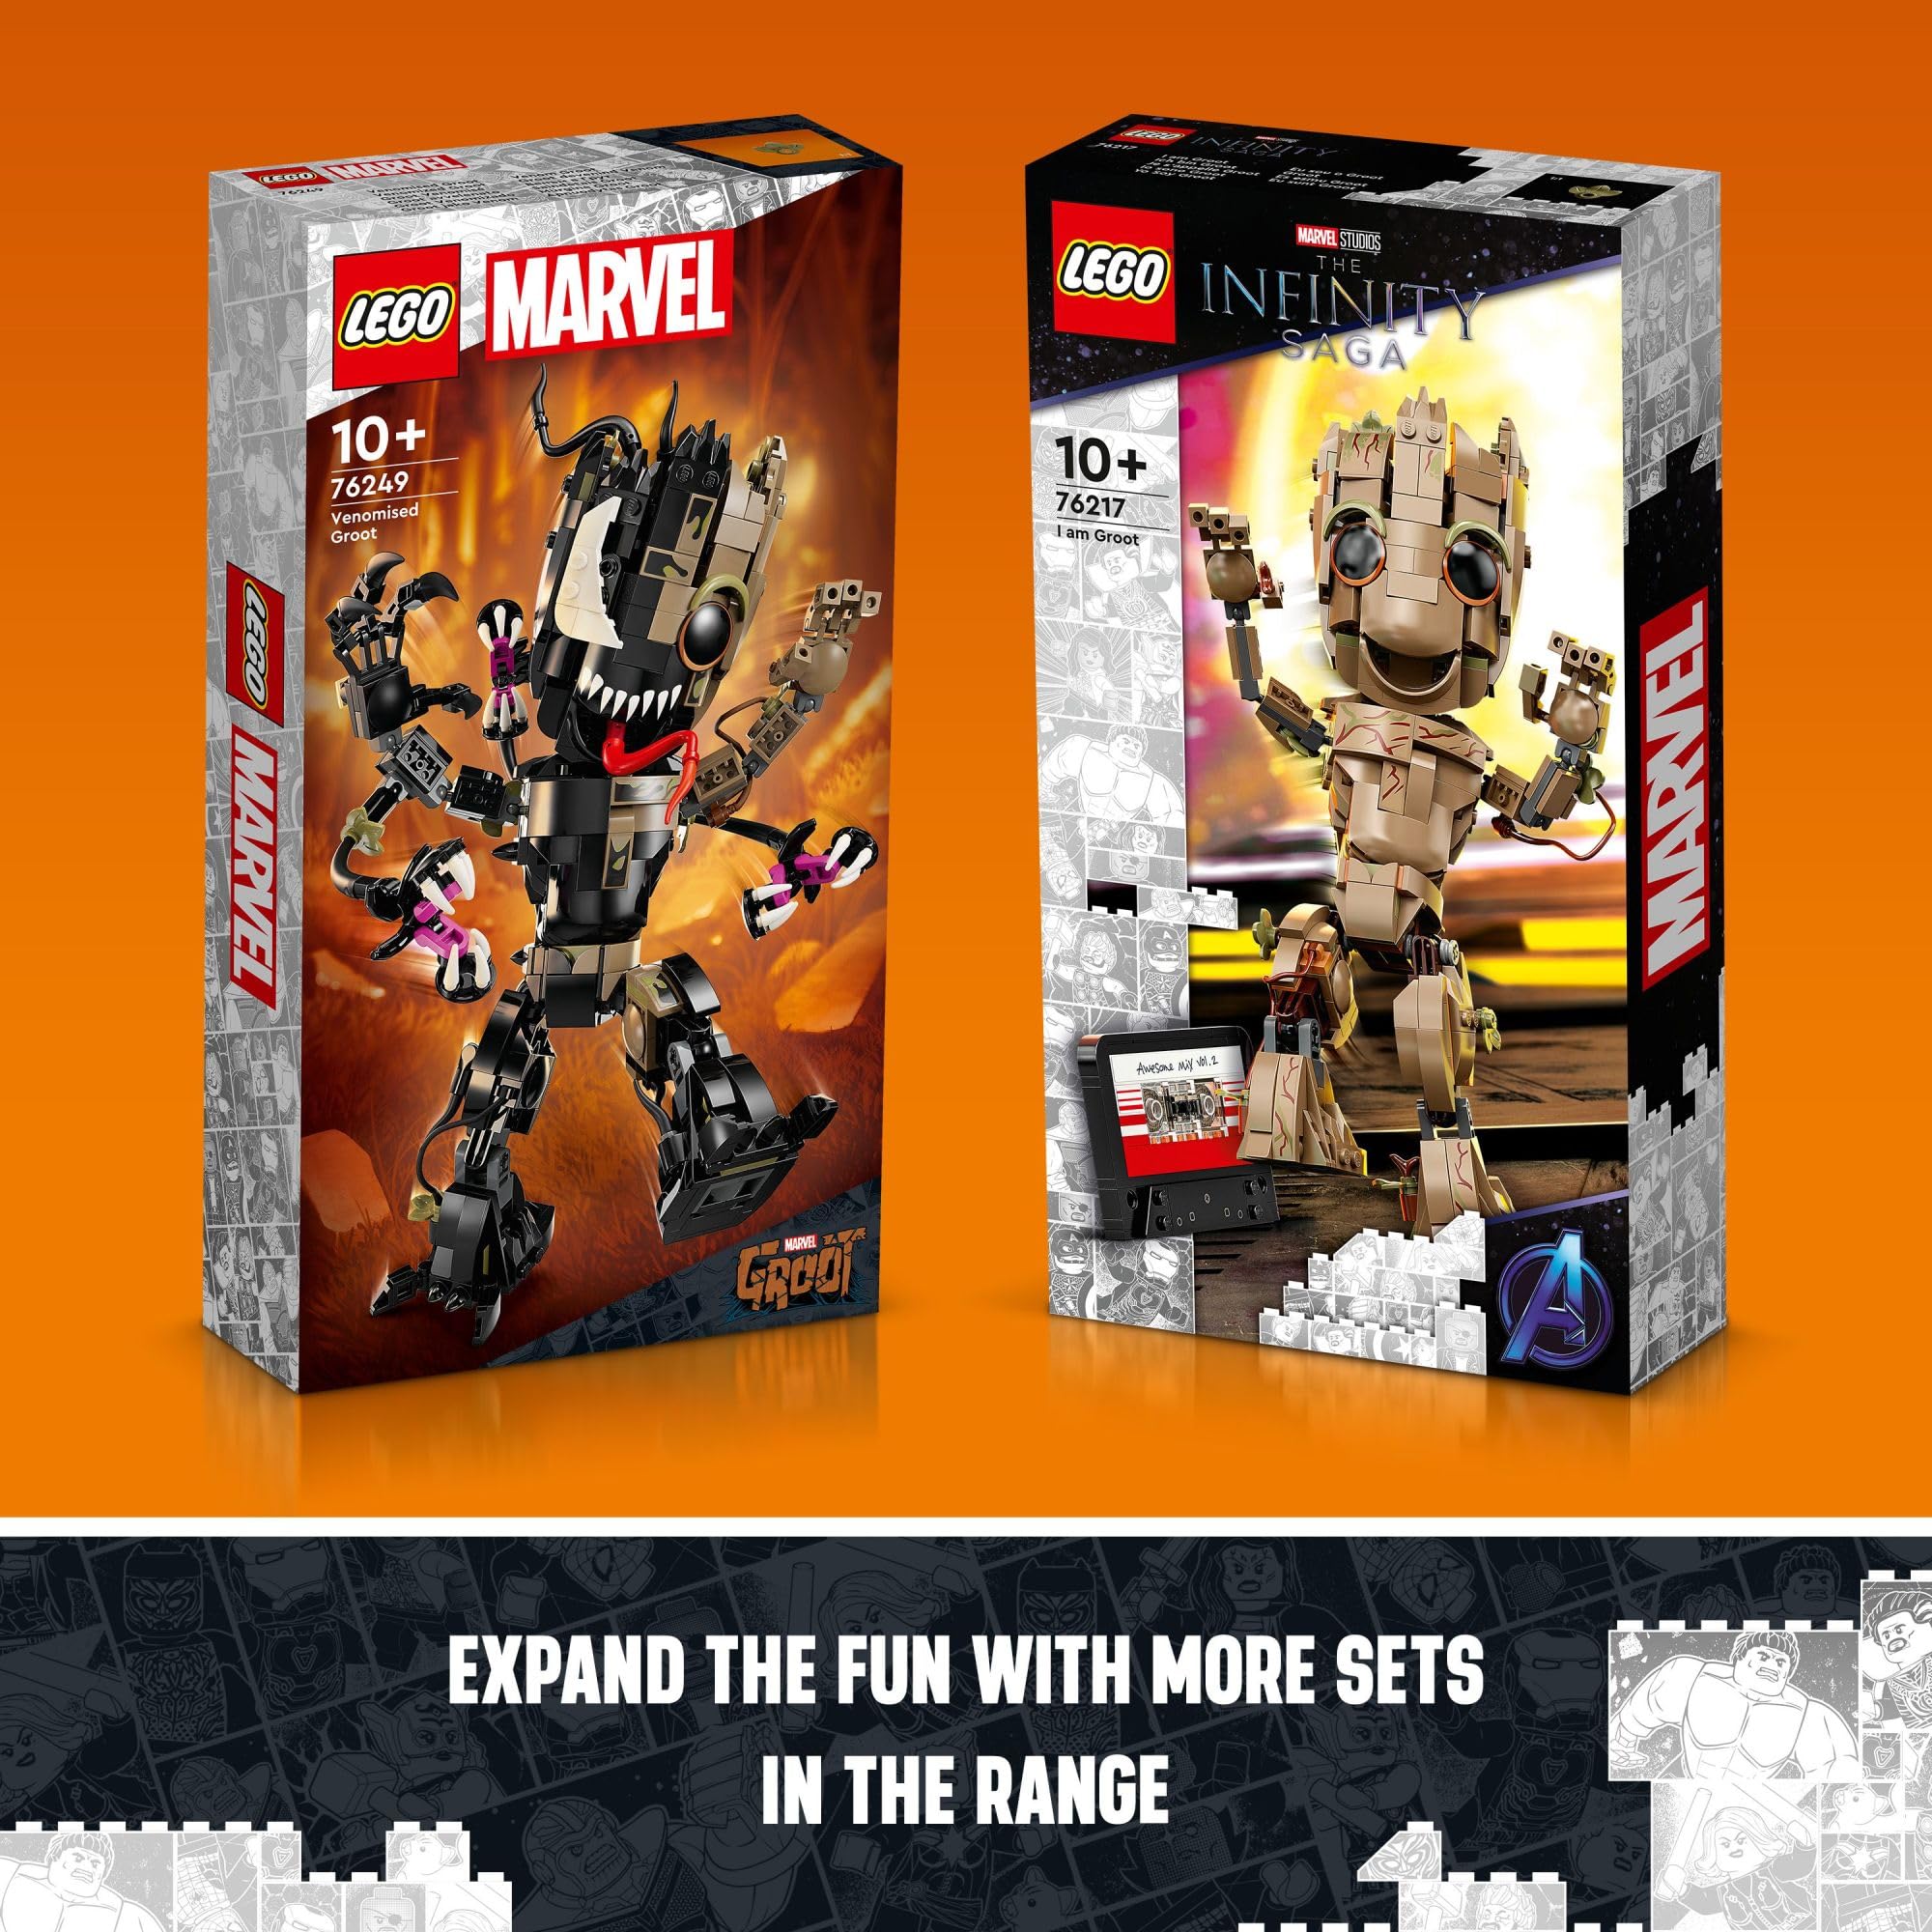 LEGO Marvel Venomized Groot 76249 Transformable Marvel Toy for Play and Display, Buildable Marvel Action Figure for Fans of the Guardians of the Galaxy Movie, Marvel Birthday Gift for 10 Year Old Kids